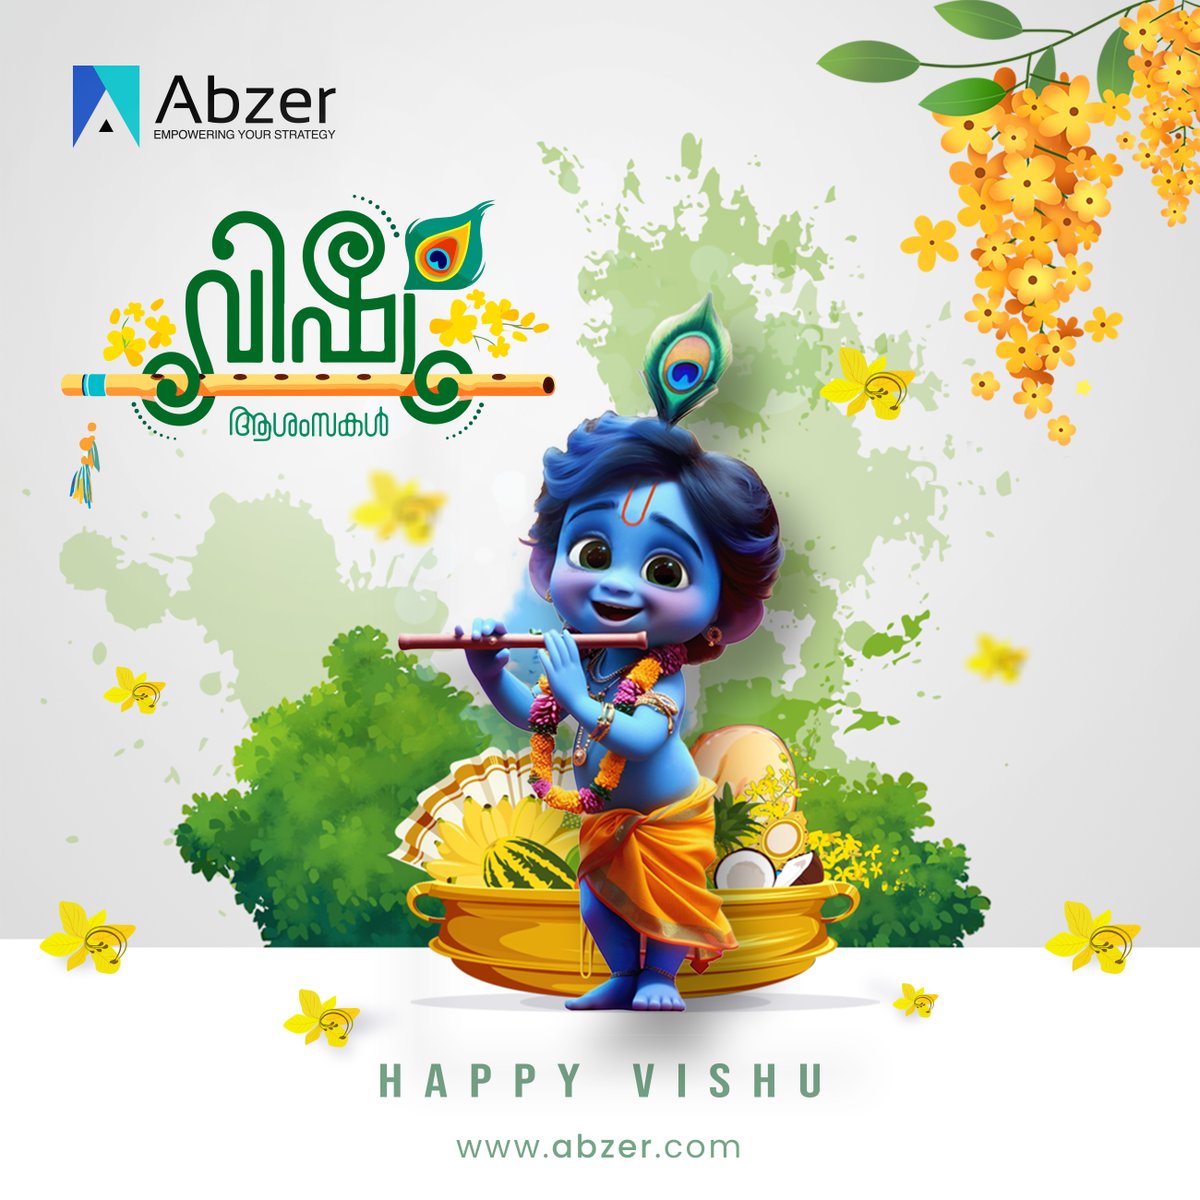 On this auspicious occasion of Vishu , Abzer wishes everyone a year filled with peace, happiness, and Success...

#Vishu2024 #vishu #AbzerDmcc #HappyVishu